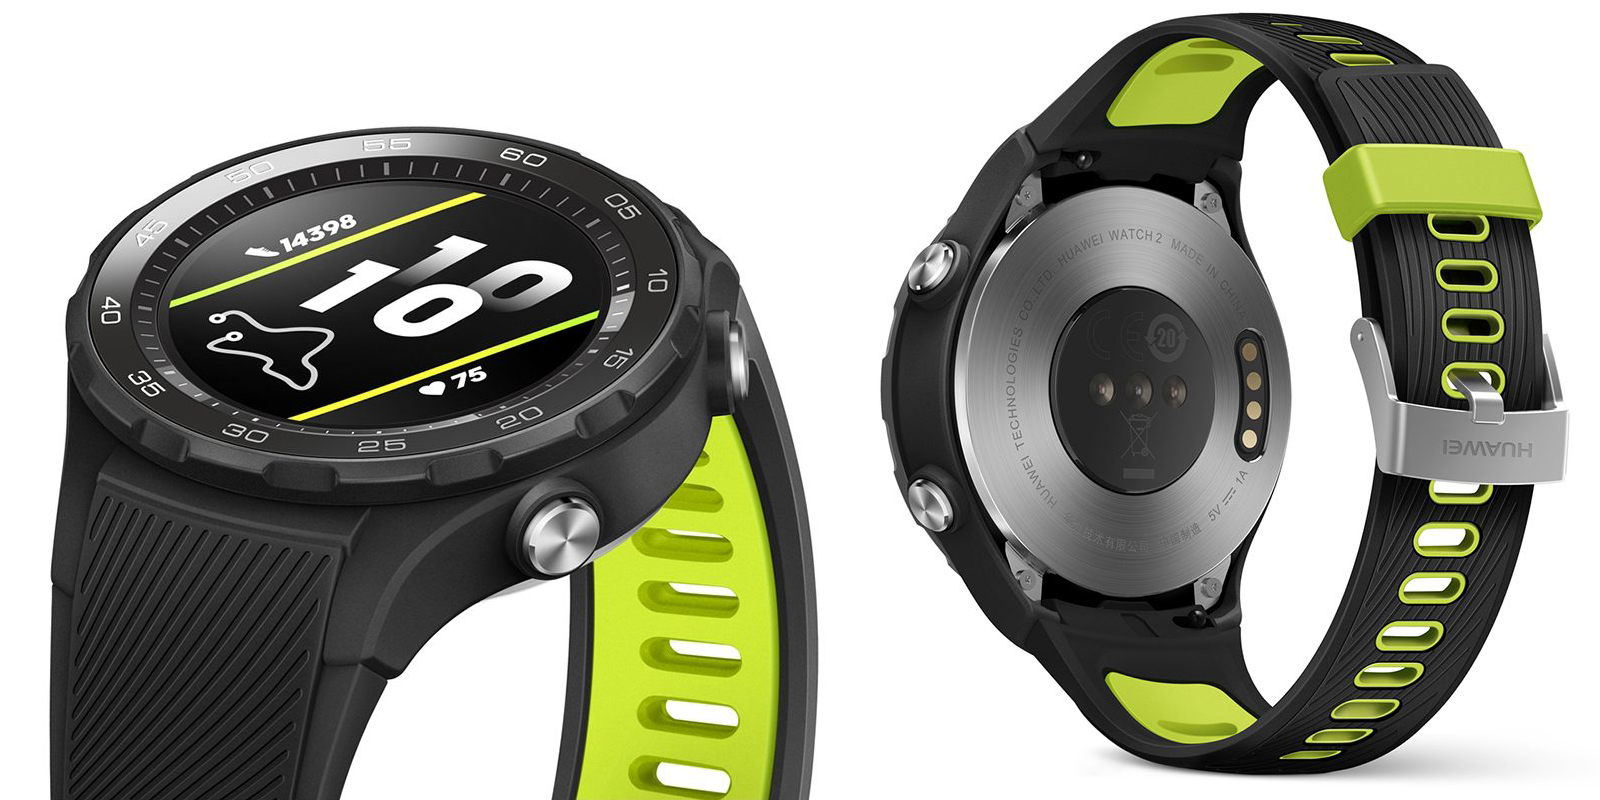 An image of the front and back of a Huawei Watch 2, 2018 model.